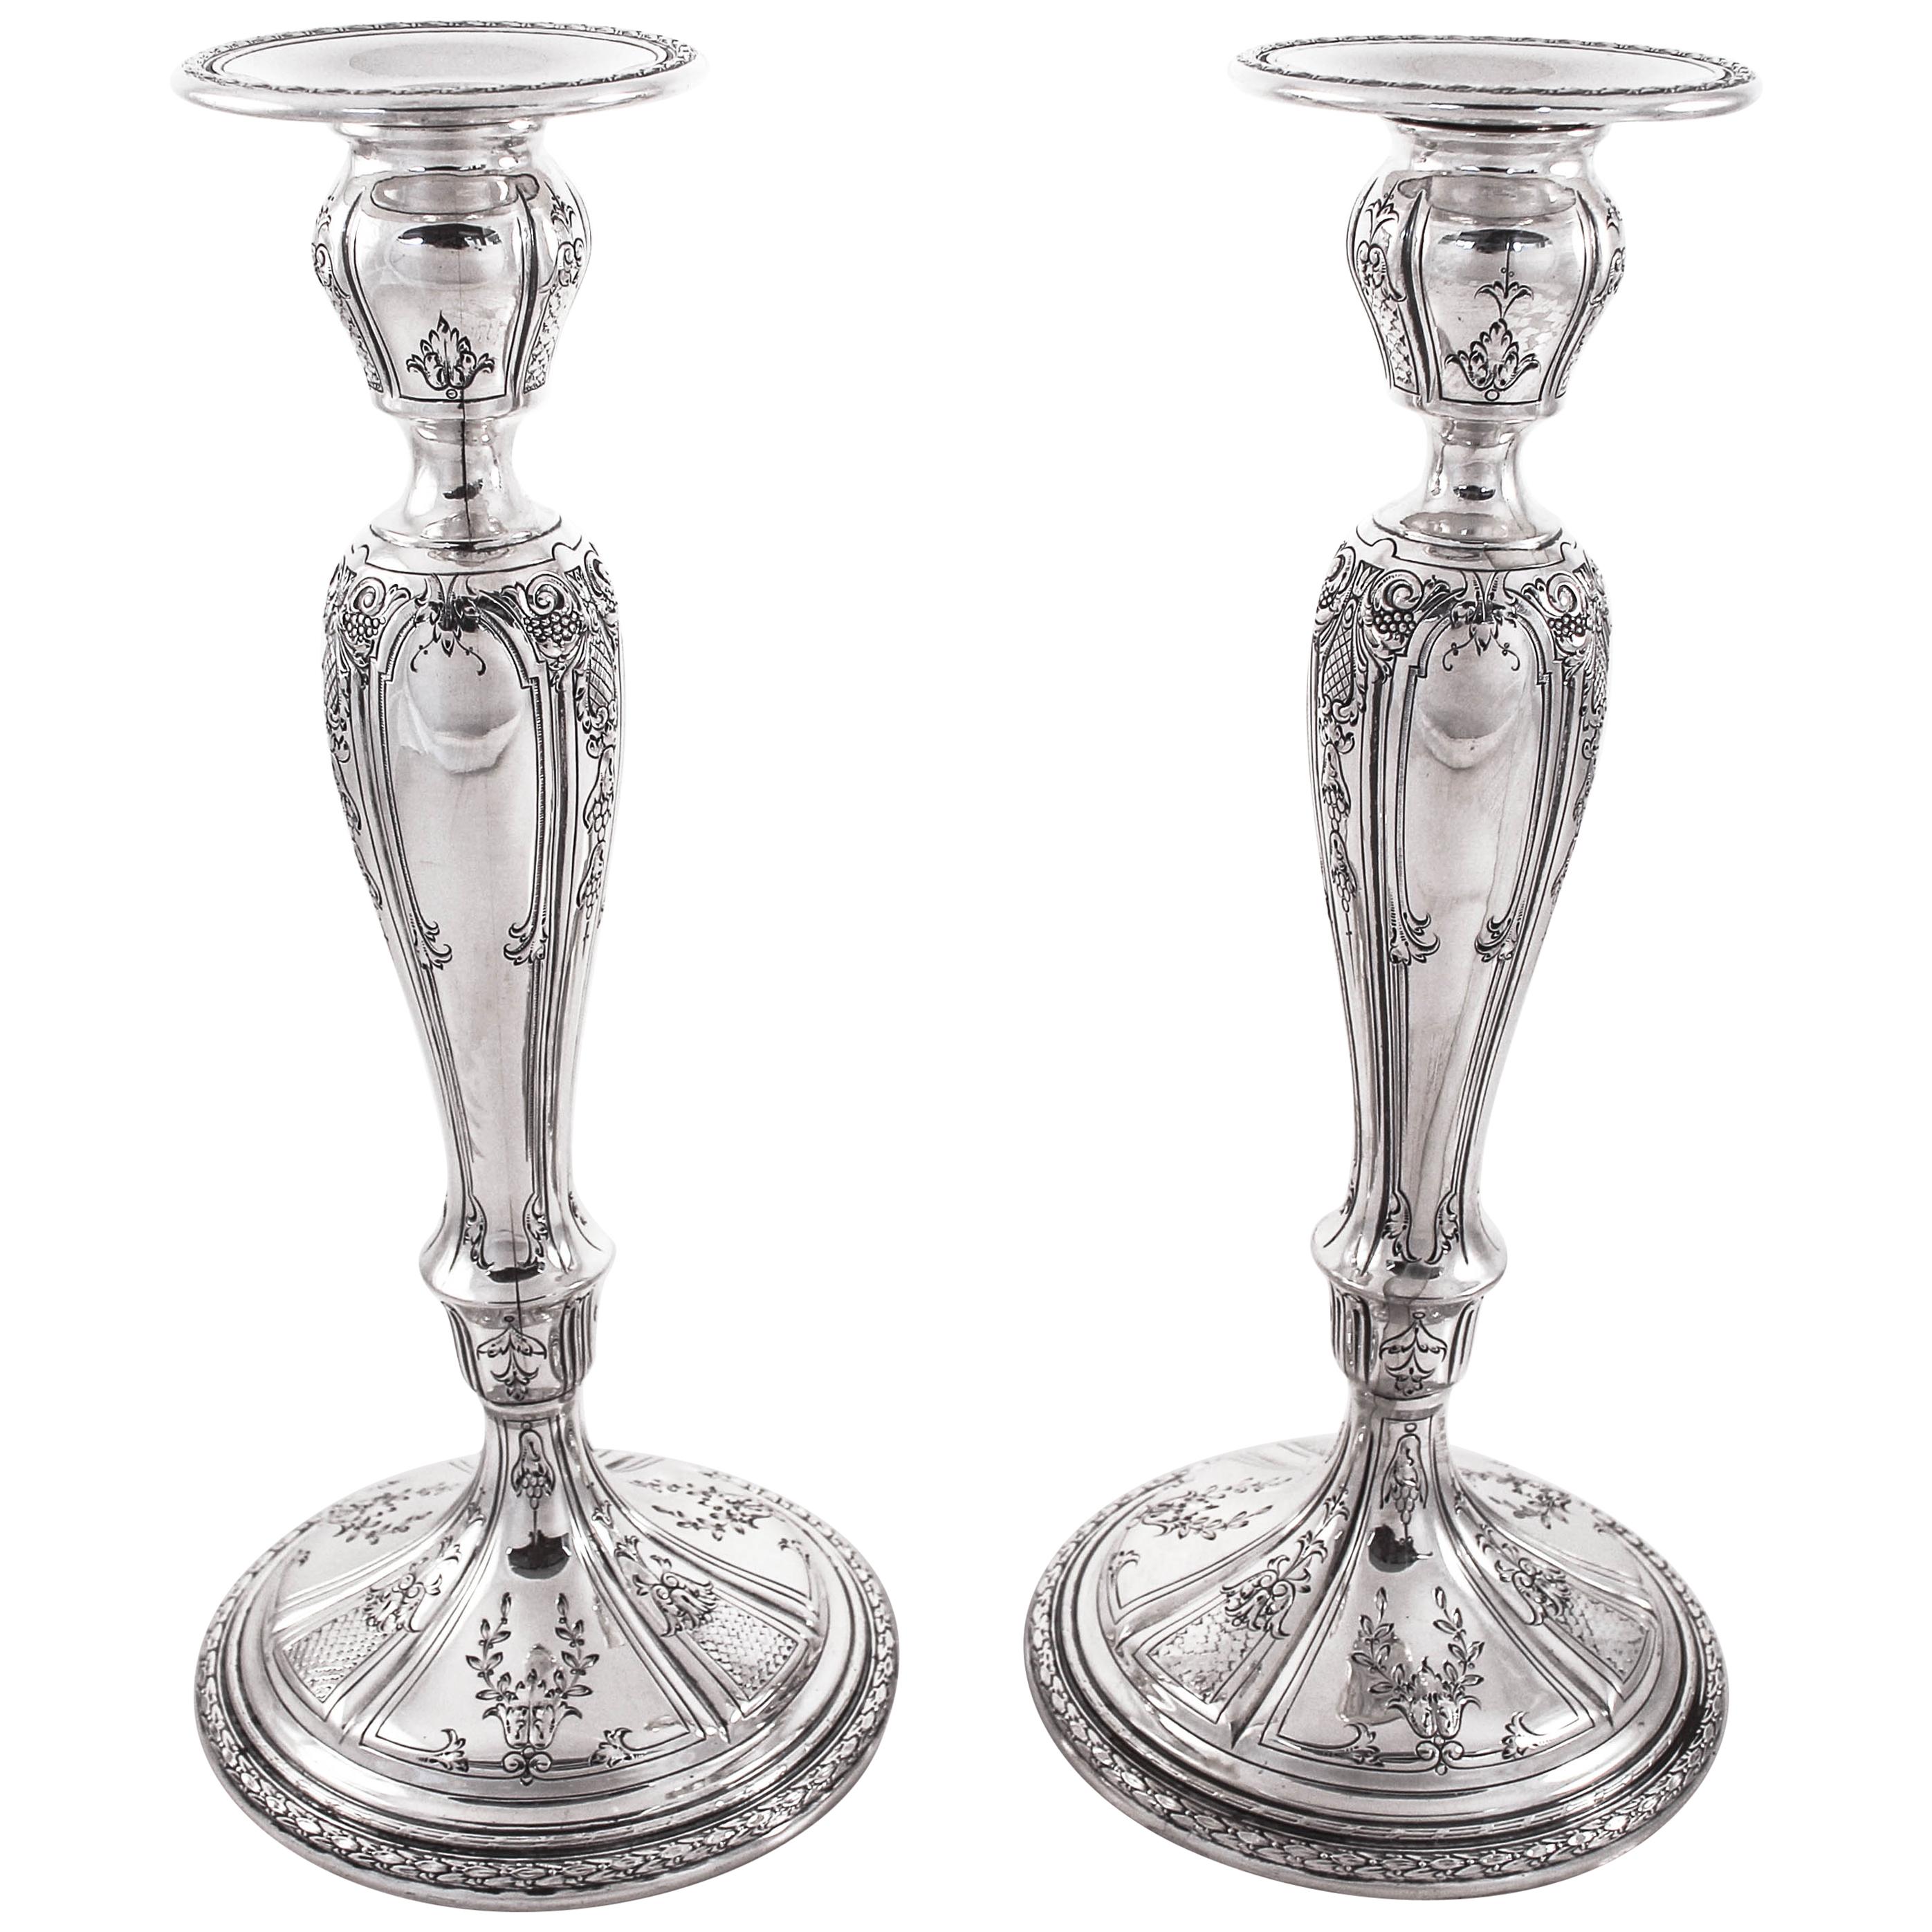 Sterling Candlesticks by Dominick and Haff